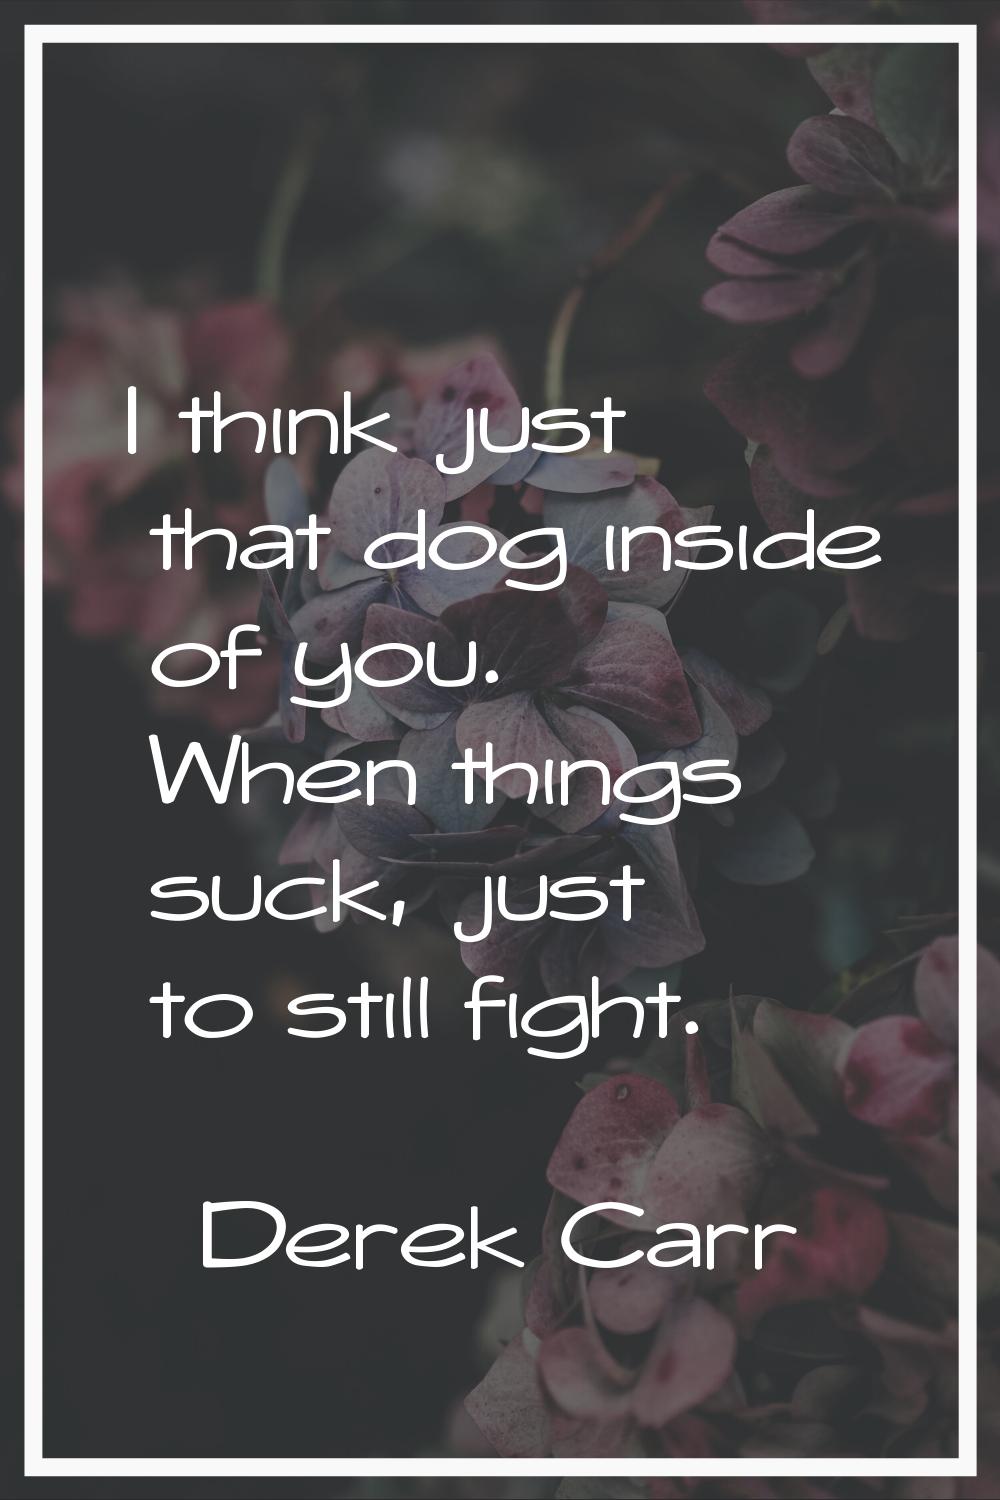 I think just that dog inside of you. When things suck, just to still fight.